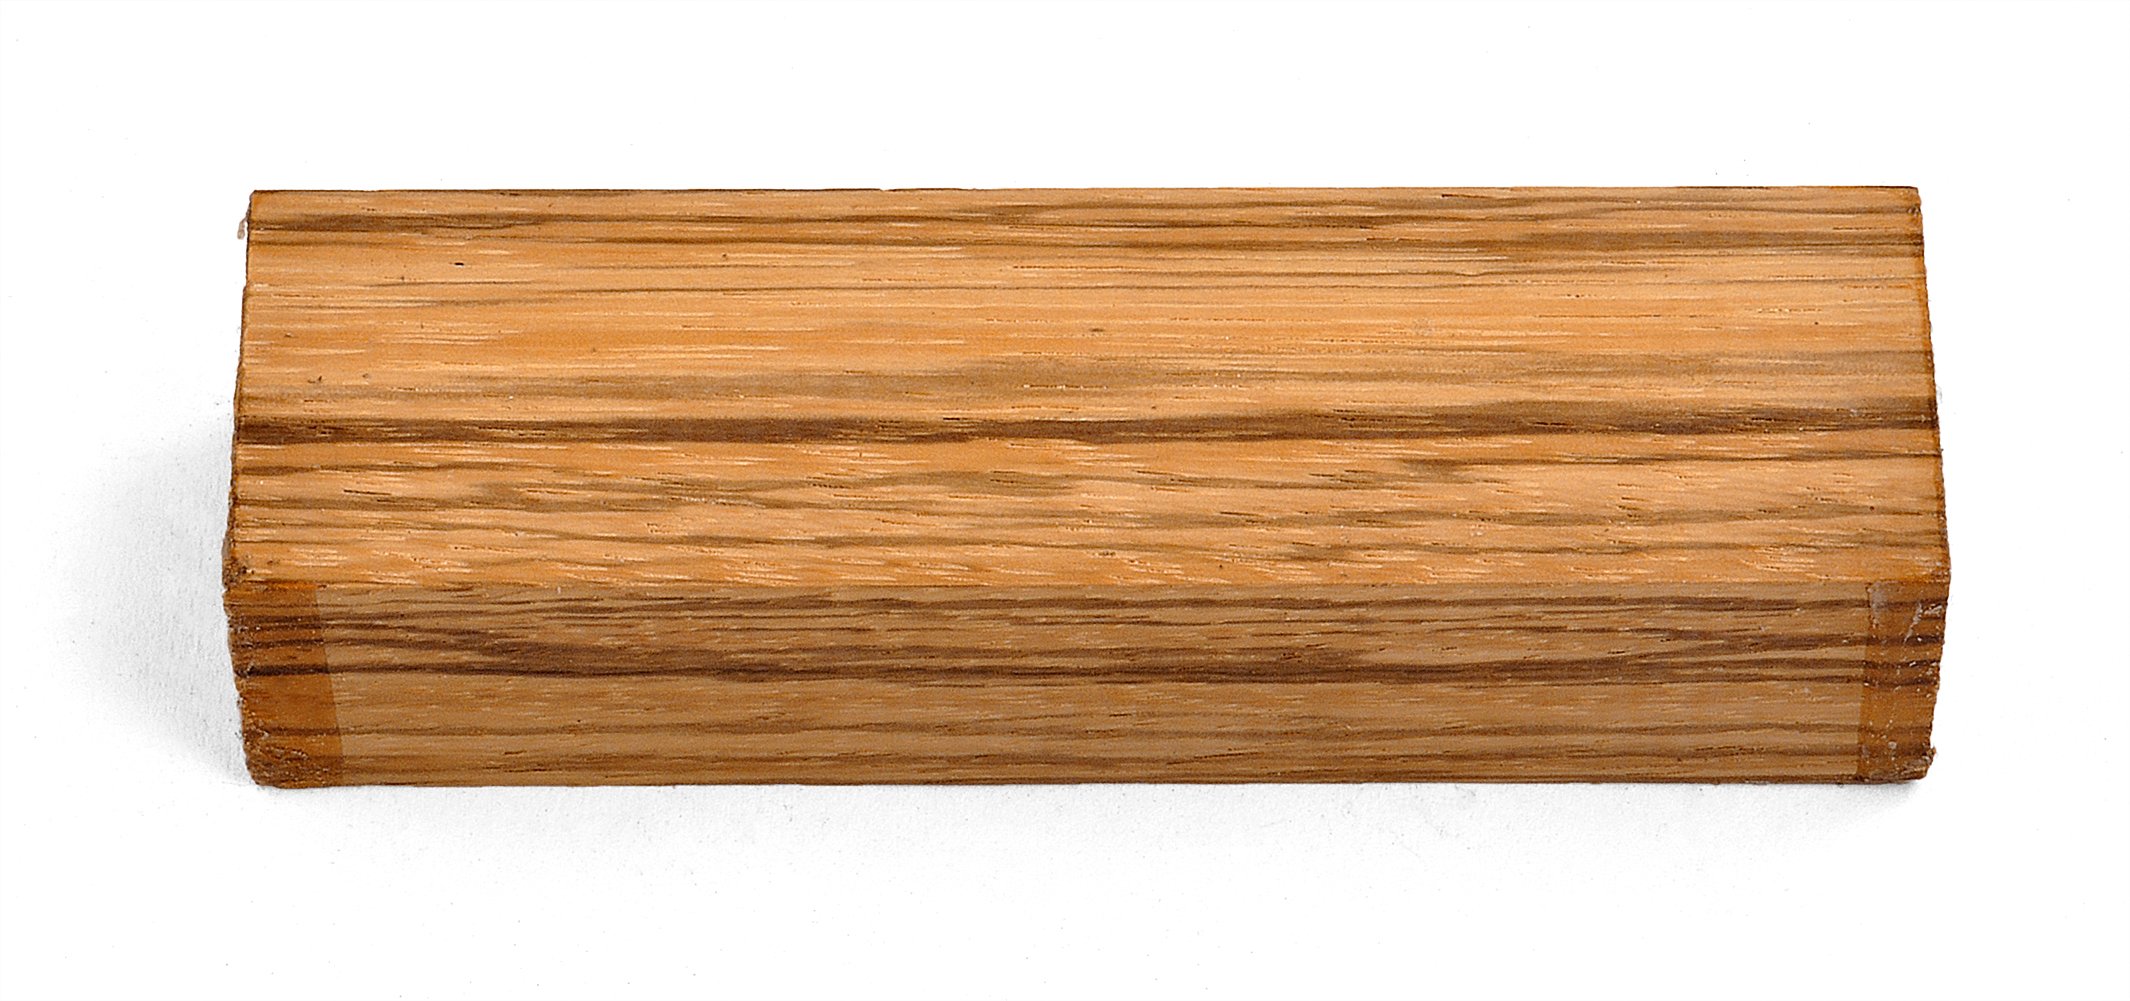 Texas Knifemakers Supply Zebrawood Knife Handle Block (Each Piece is Unique) 5" x 1-1/2" x 1"